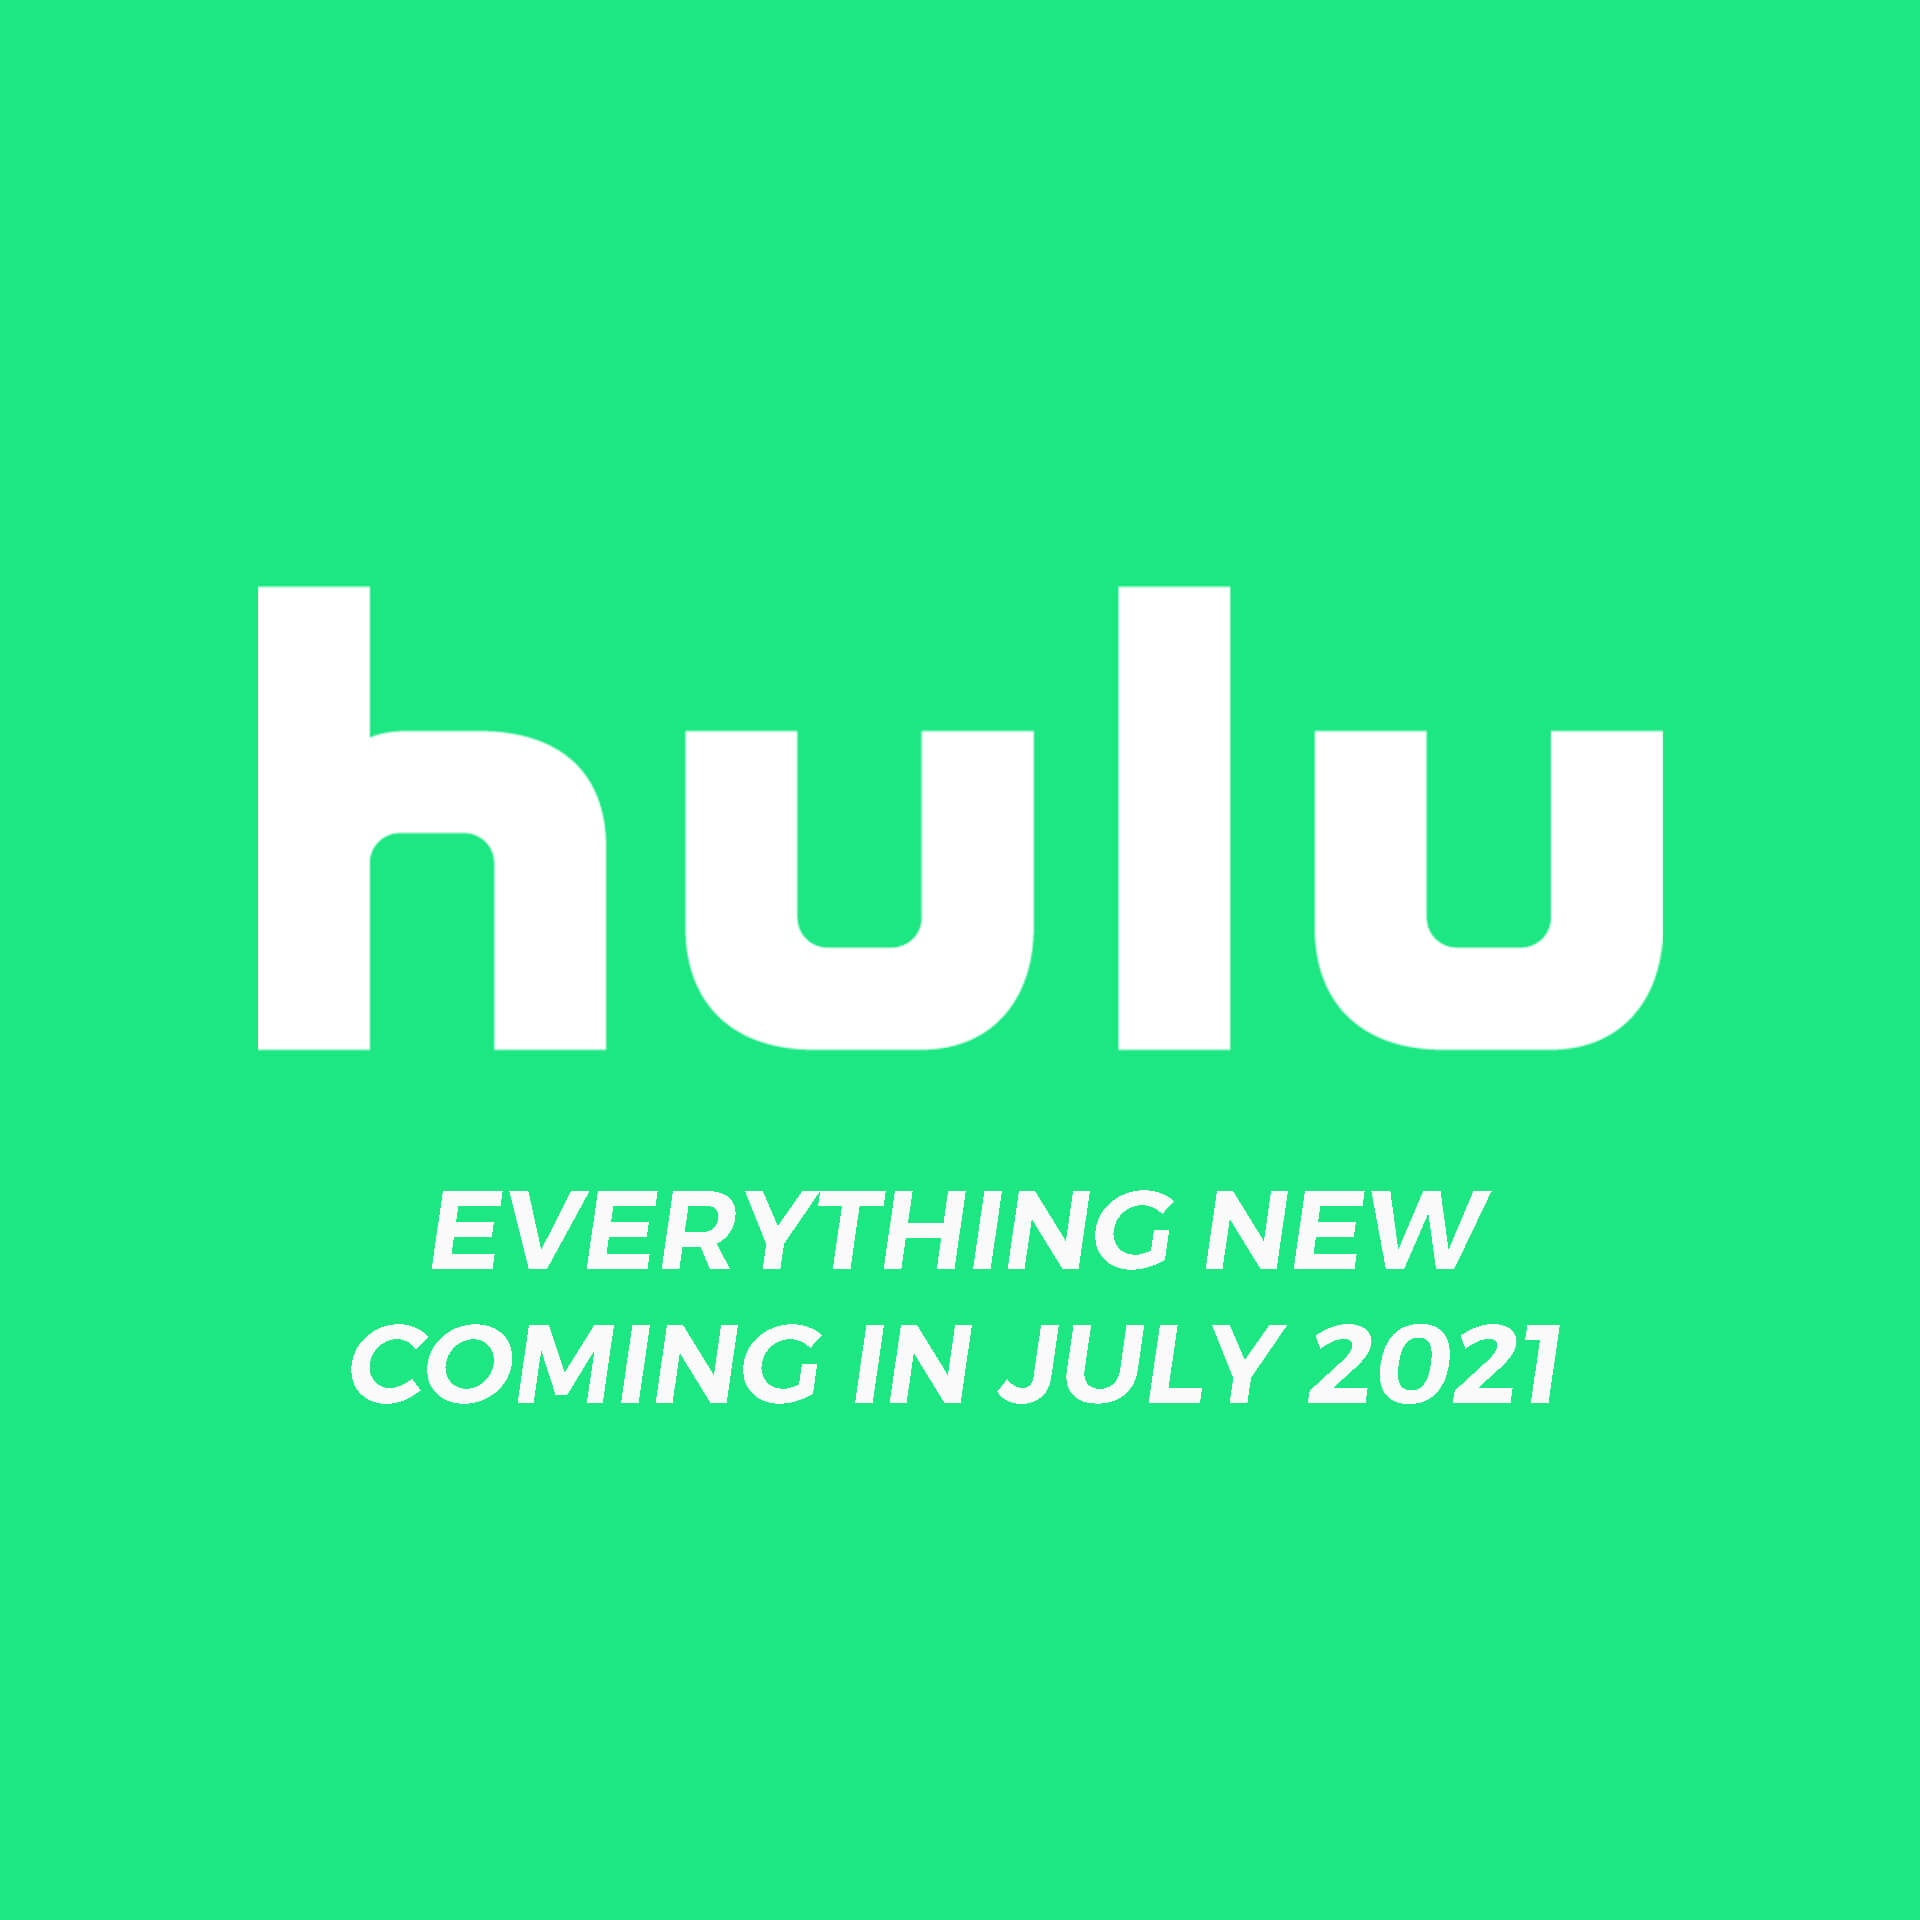 Everything New Coming To Hulu In July 2021